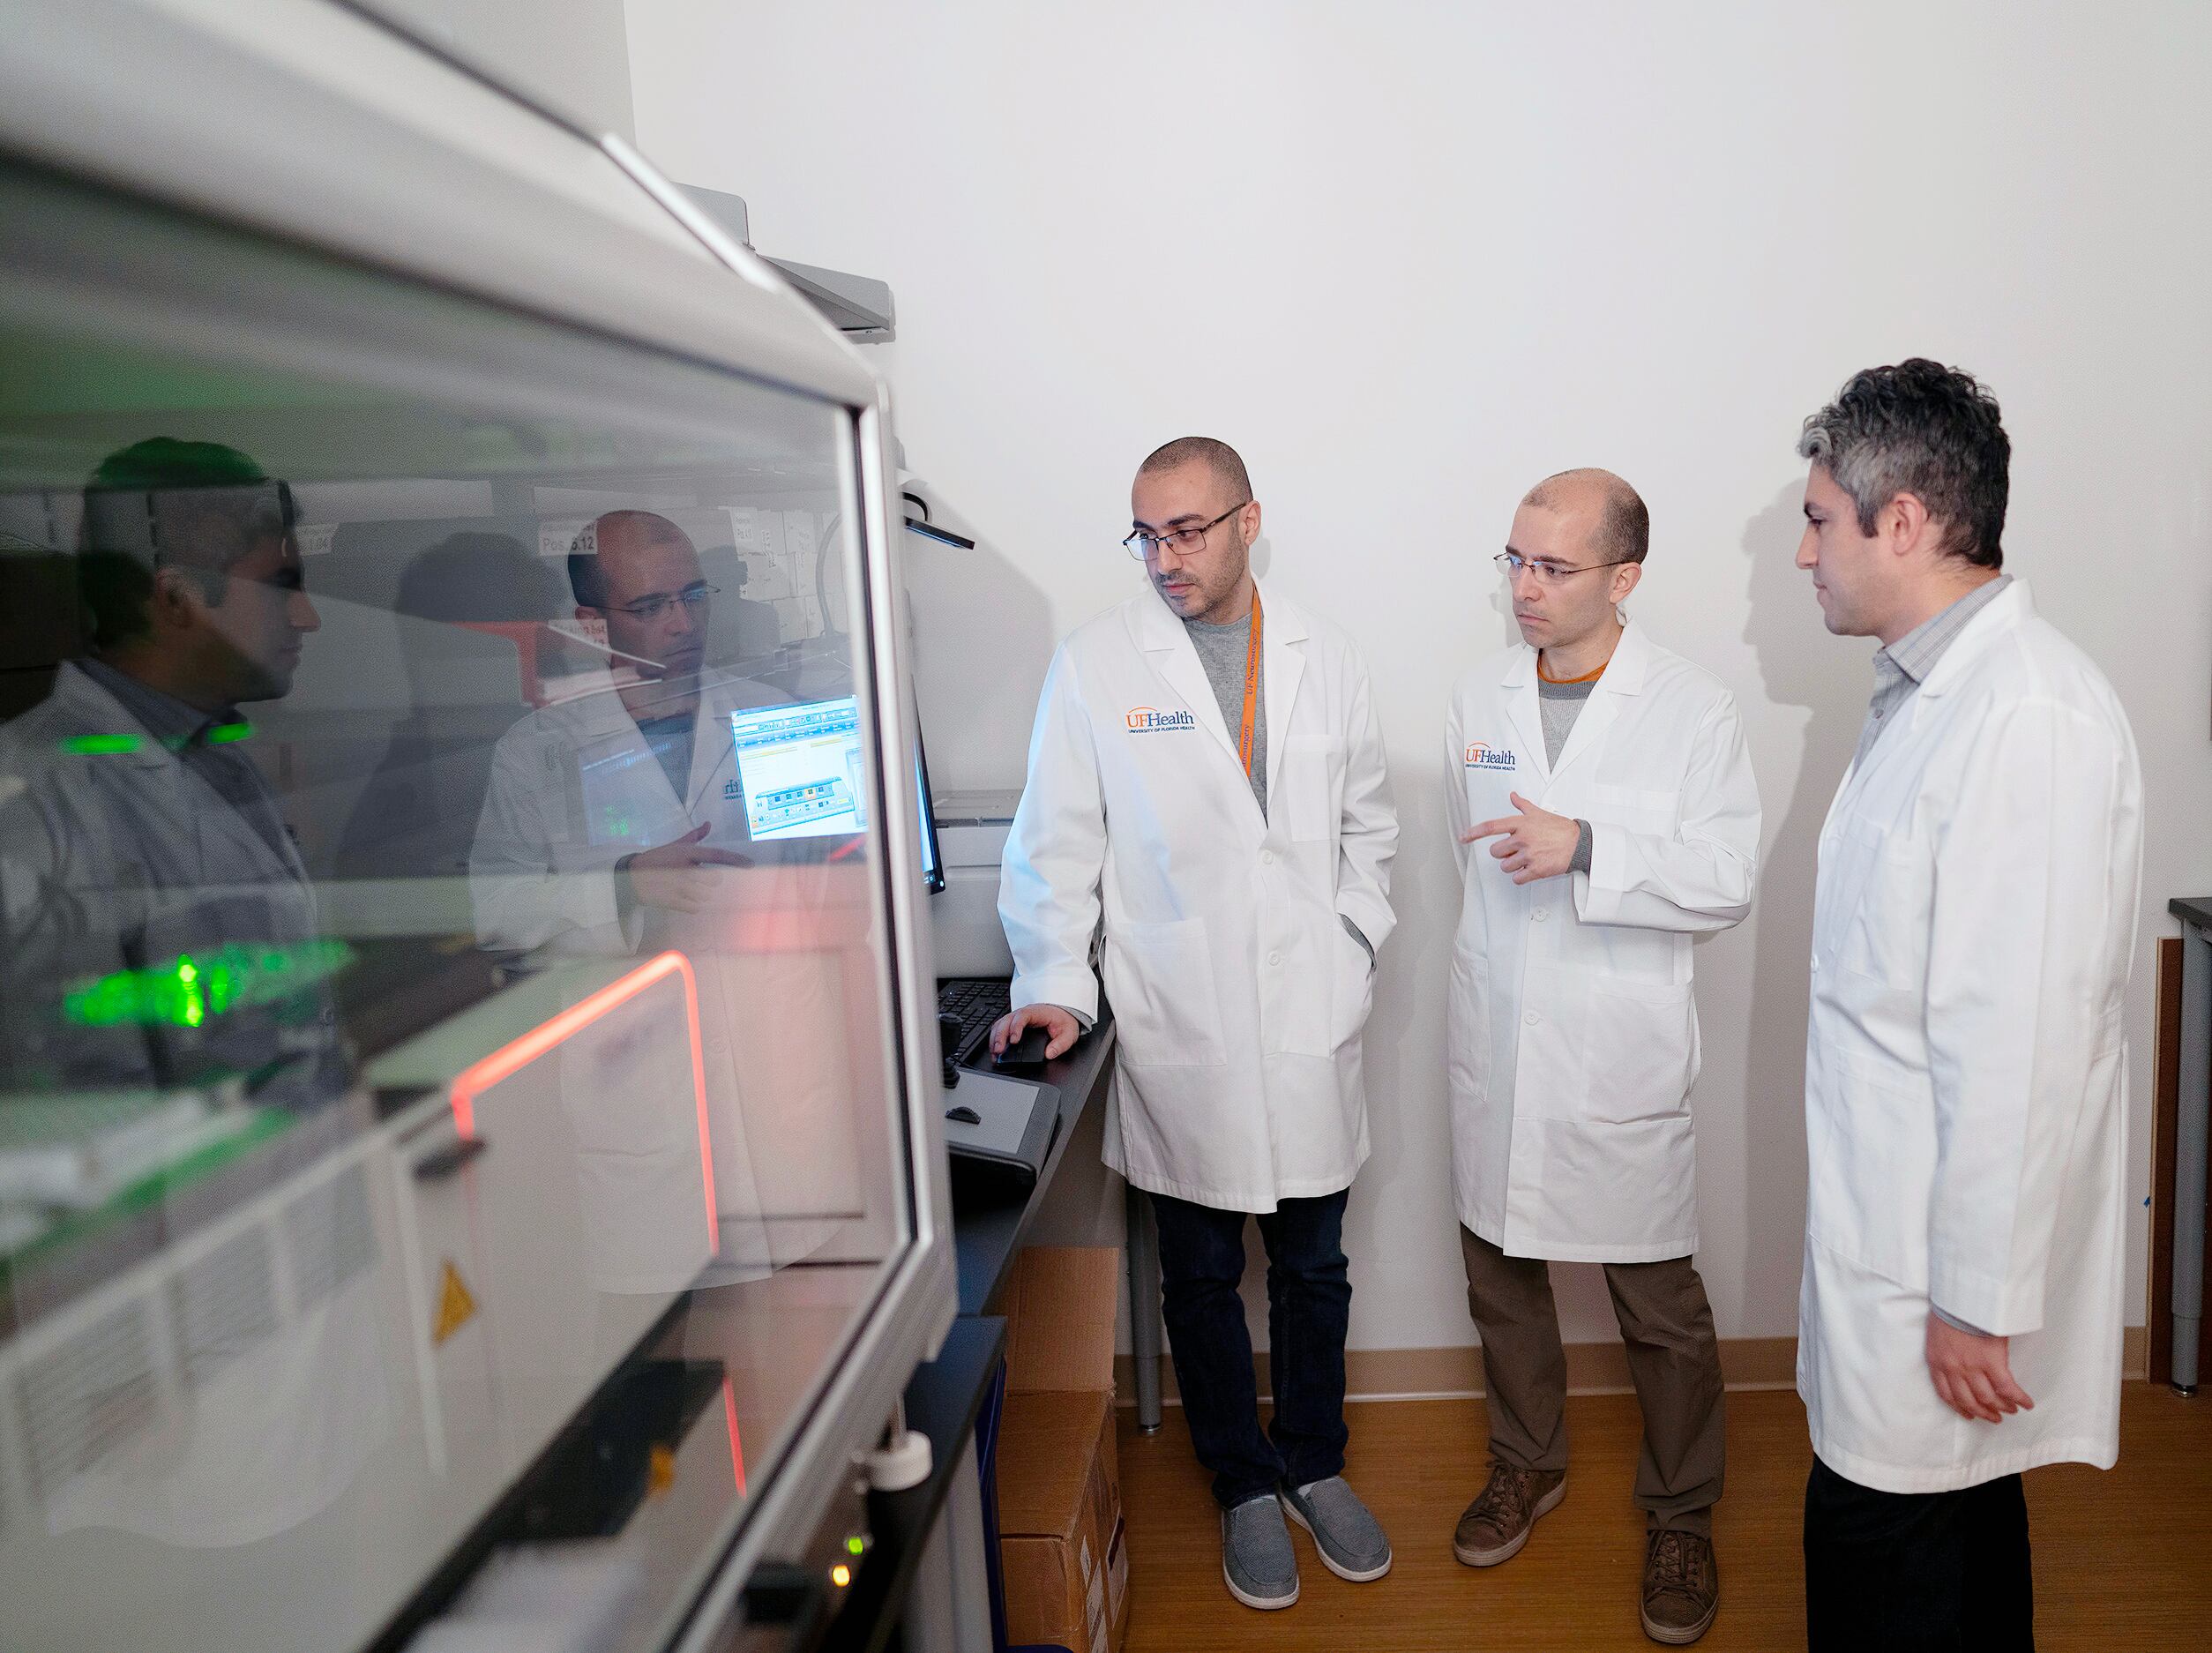 From left to right, scientists Sadeem Qdaisat, Hector Méndez and Elias Sayour, co-creators of the experimental vaccine against glioblastoma, at the University of Florida.